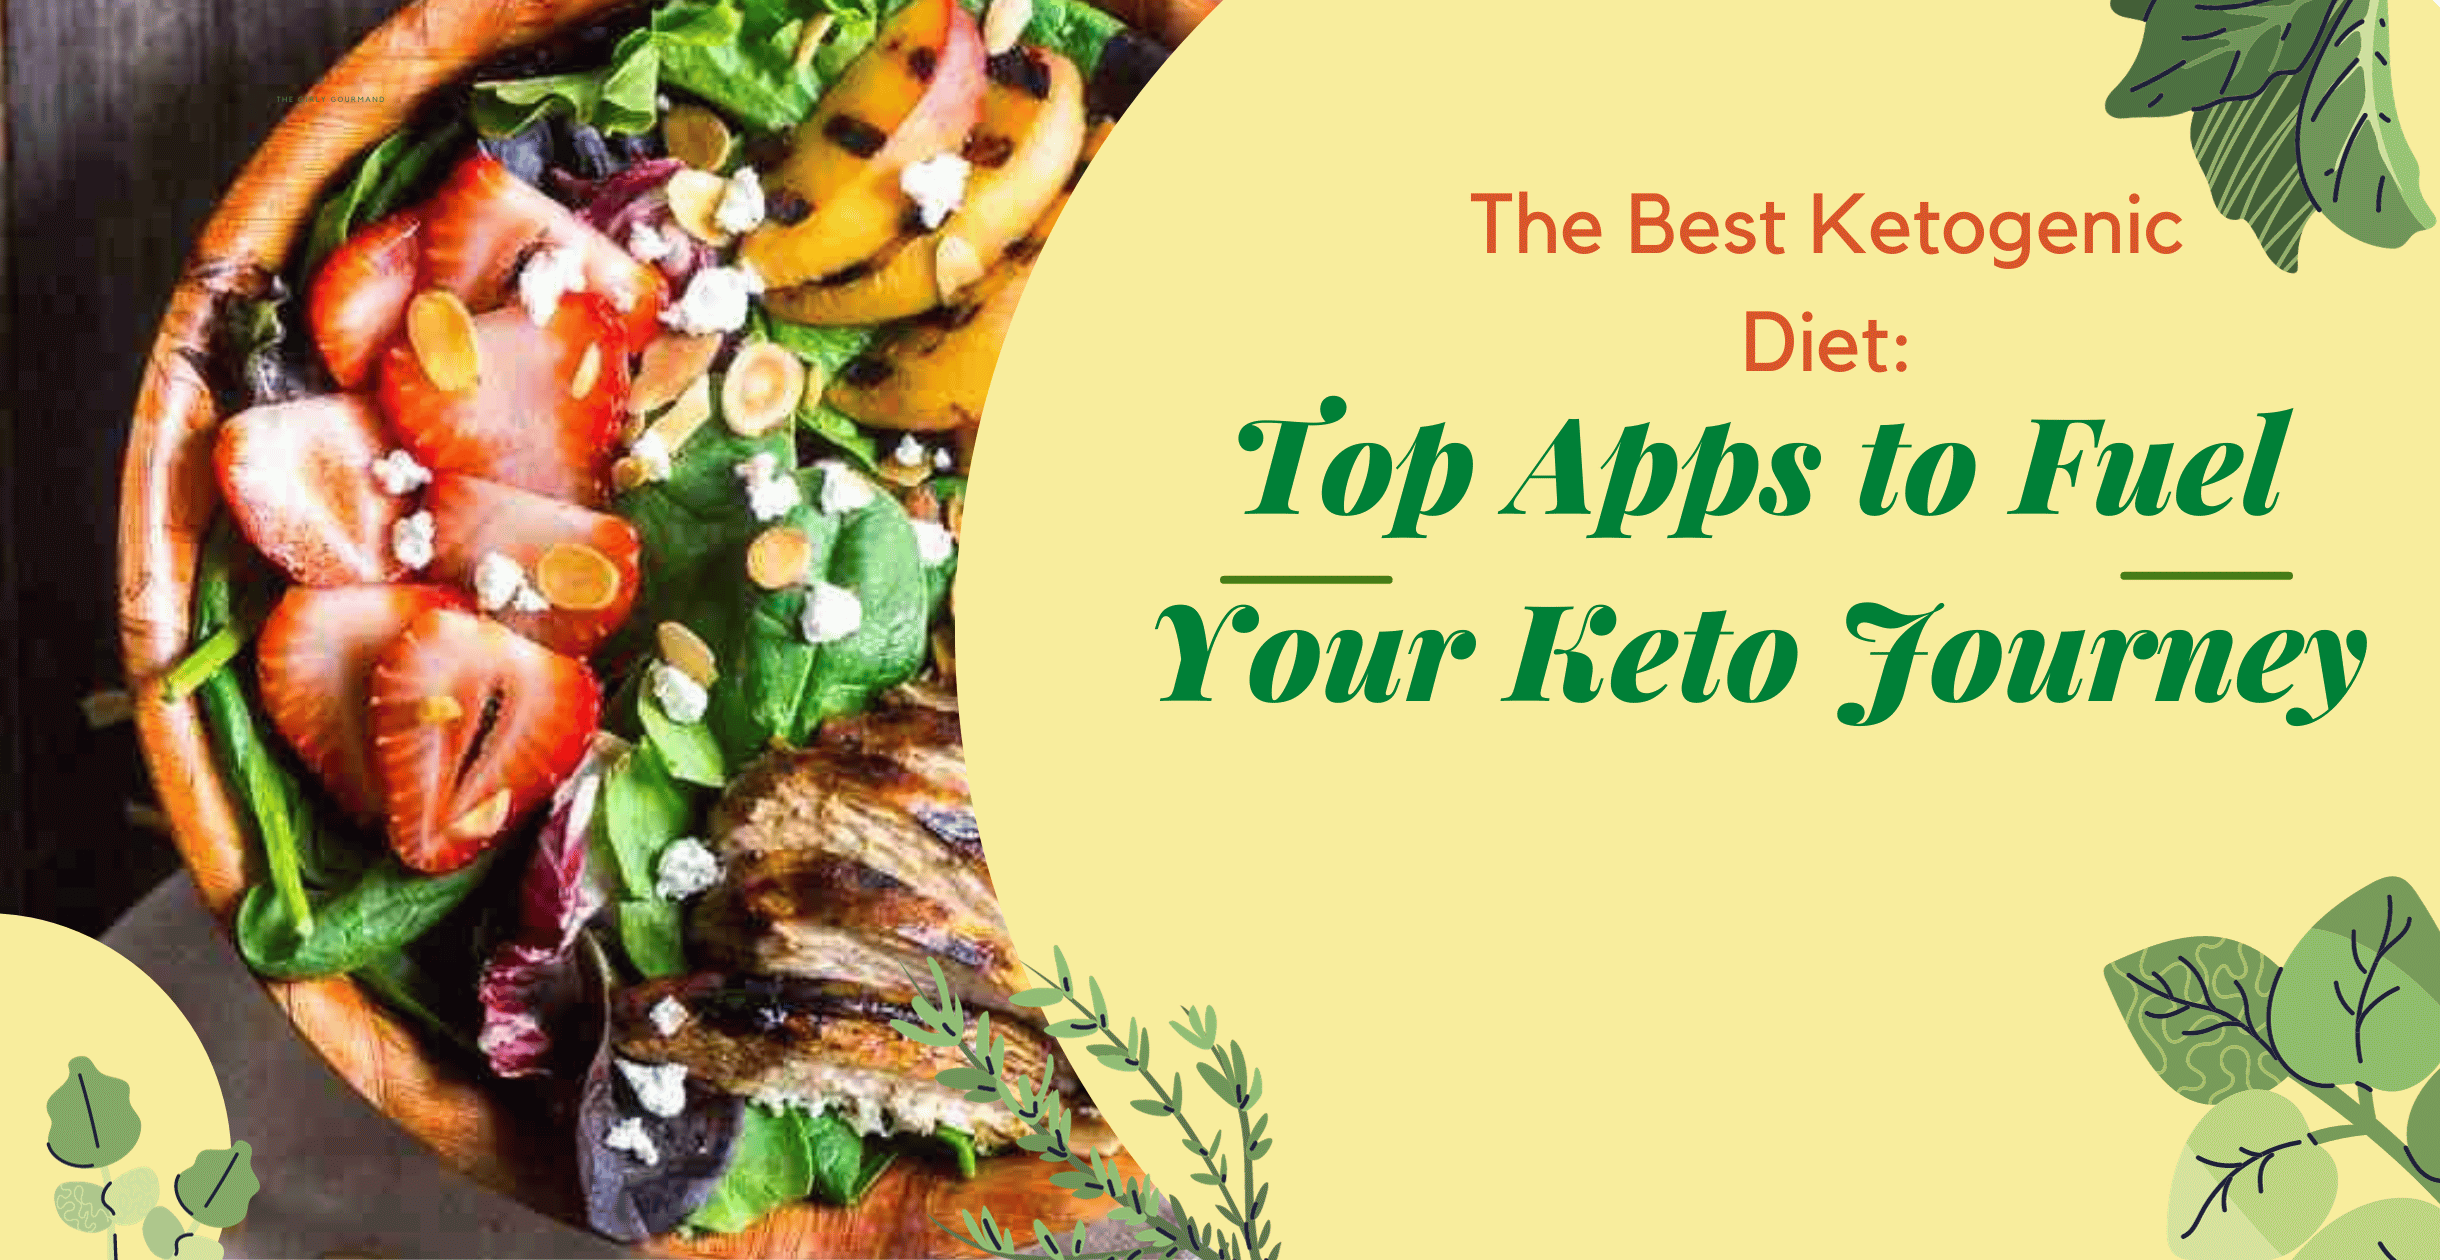 The Best Ketogenic Diet: Top Apps to Fuel Your Keto Journey